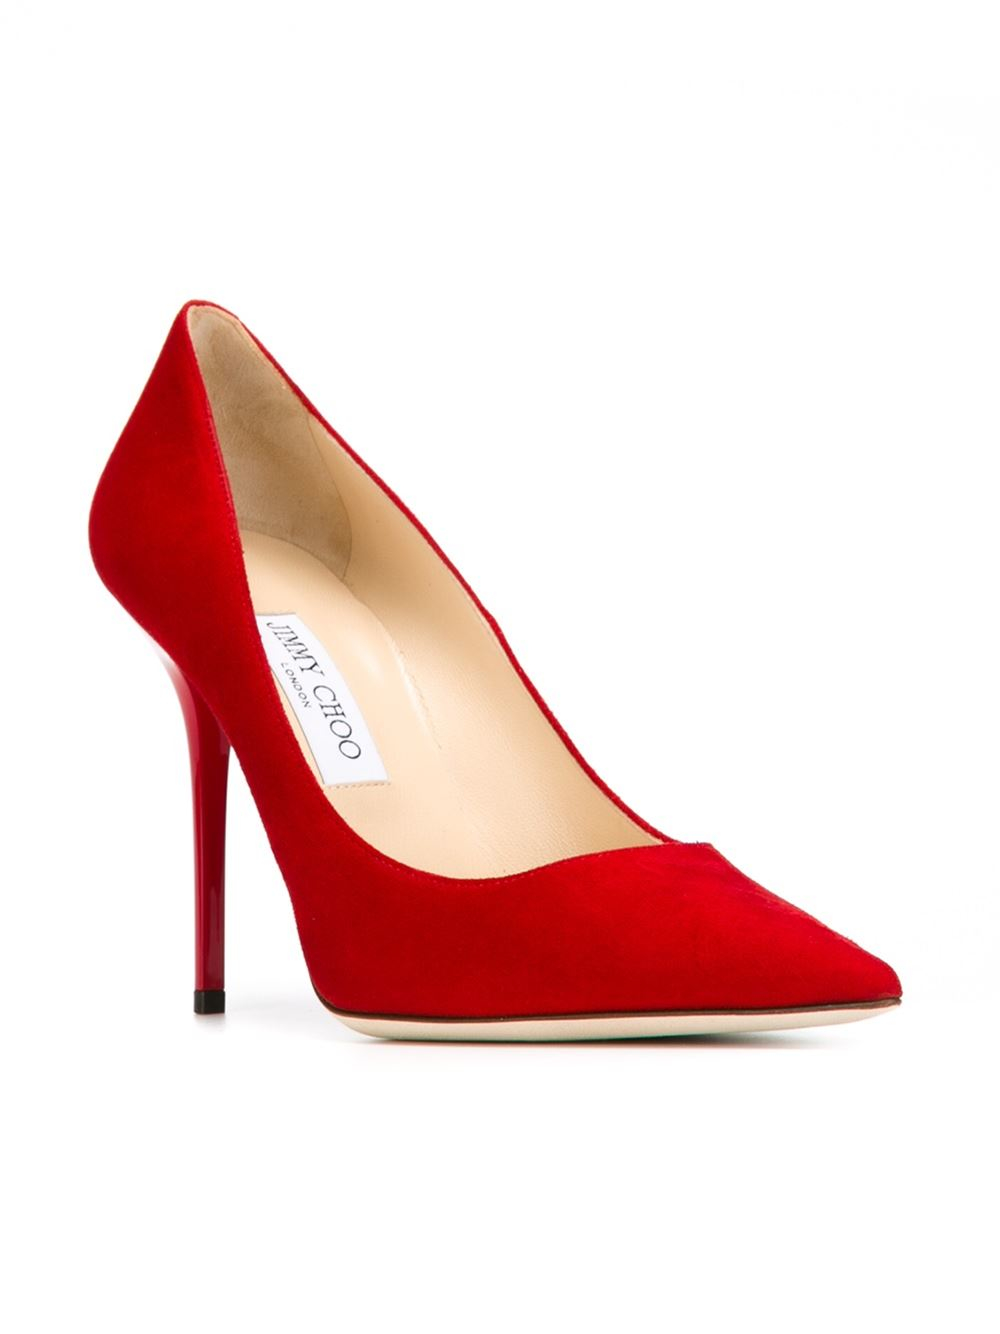 Lyst - Jimmy Choo Abel Pointed-Toe Pumps in Red